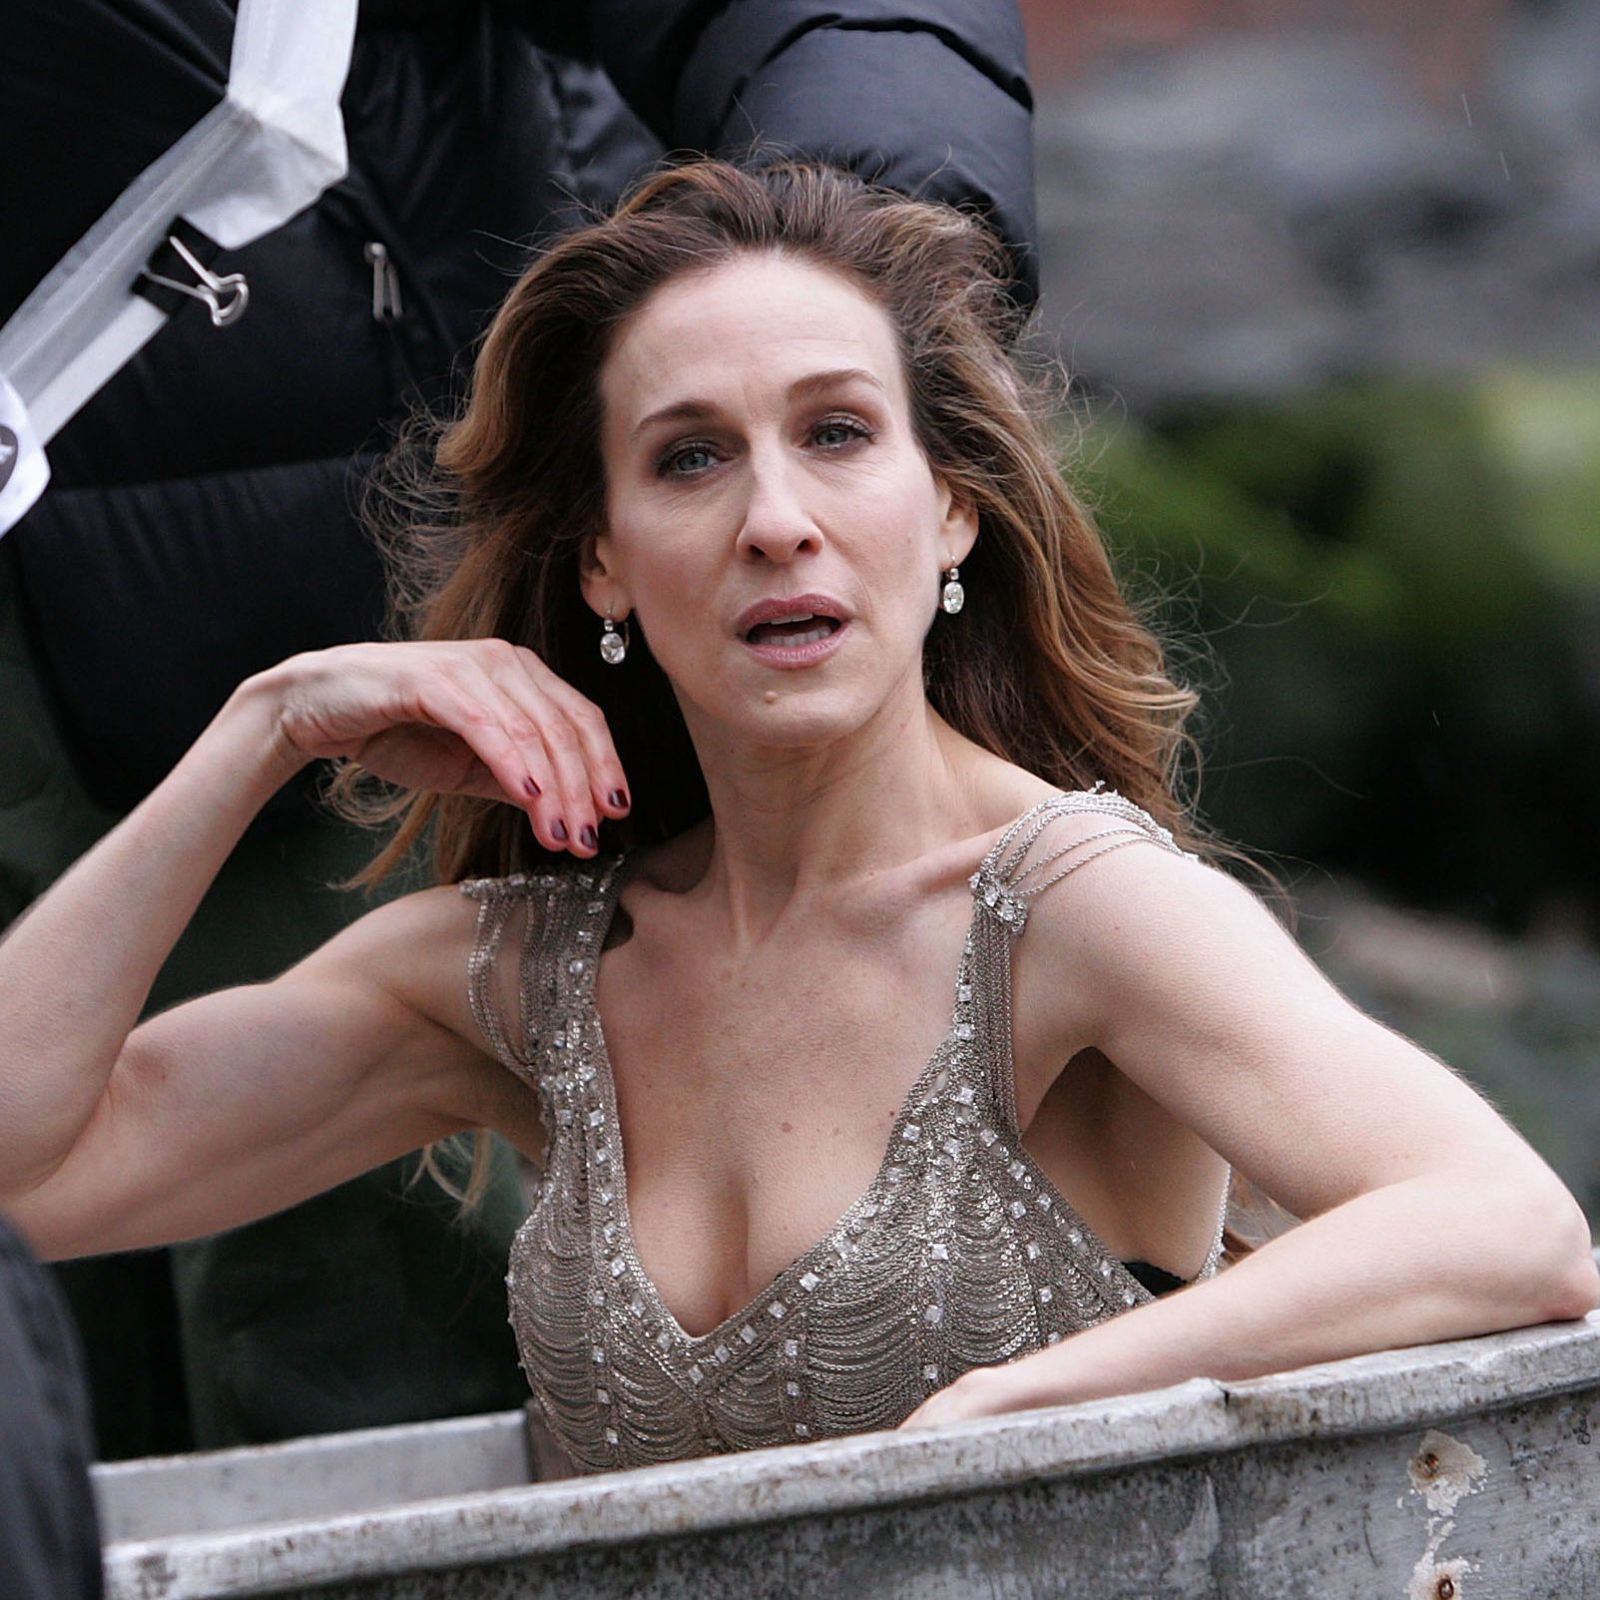 Sarah Jessica Parker Details How She Wept As Producers Tried To Get Her To Film Nude image